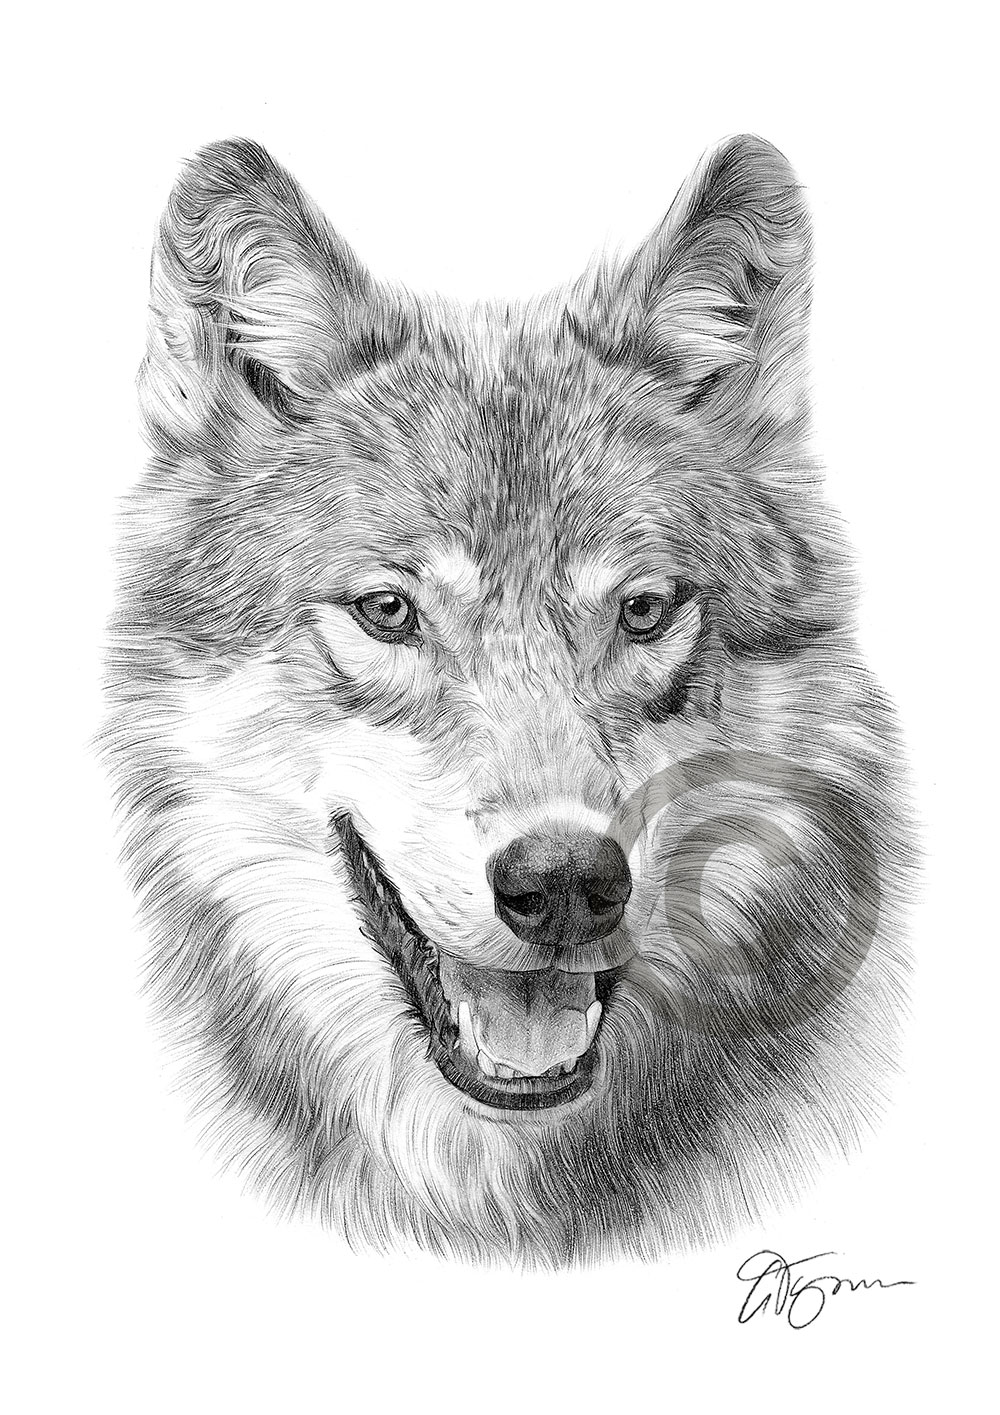 Best How To Draw A Gray Wolf of the decade The ultimate guide 